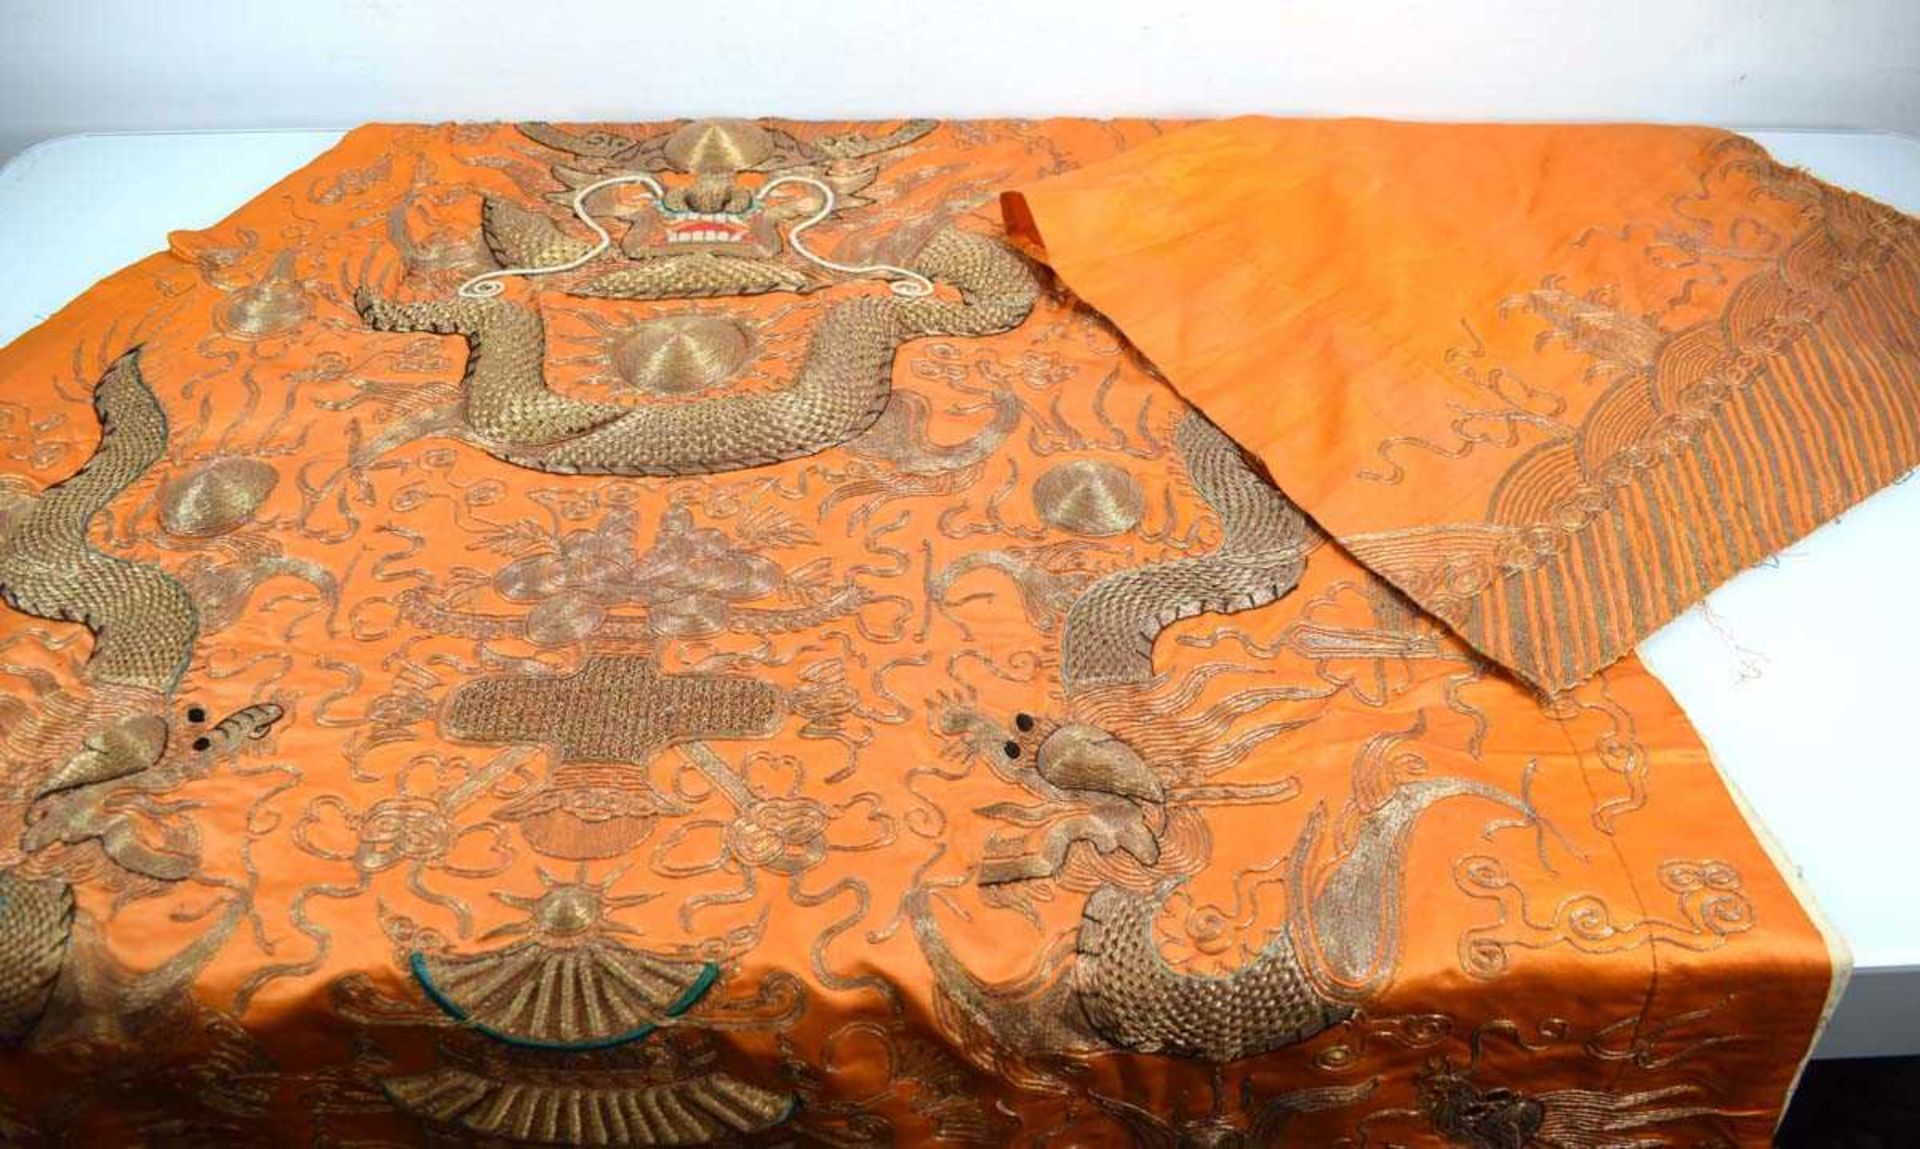 A Chinese robe section worked in gold coloured threads depicting dragons and a pagoda on an orange